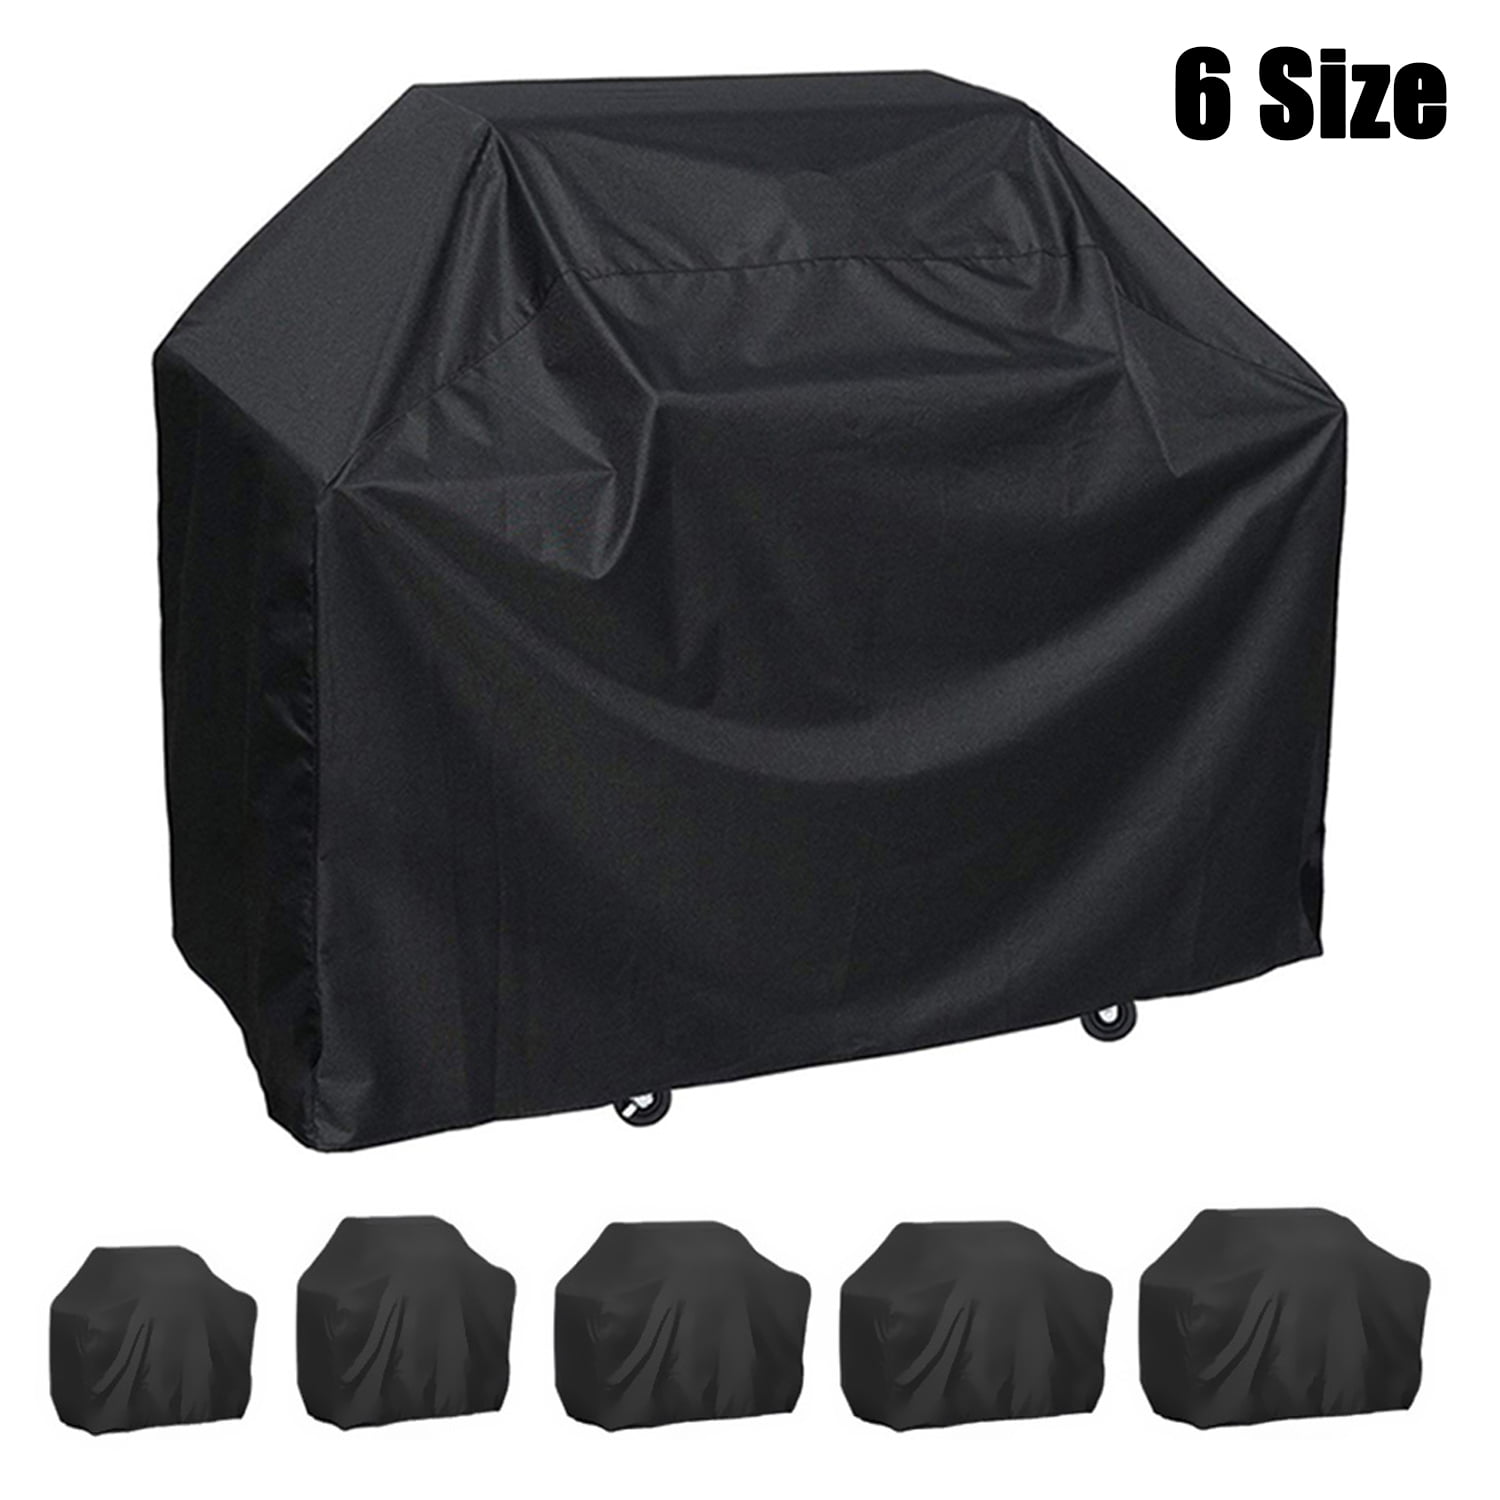 BBQ Gas Grill Cover 57" Barbecue Waterproof Outdoor Heavy Duty Protection w/bag 